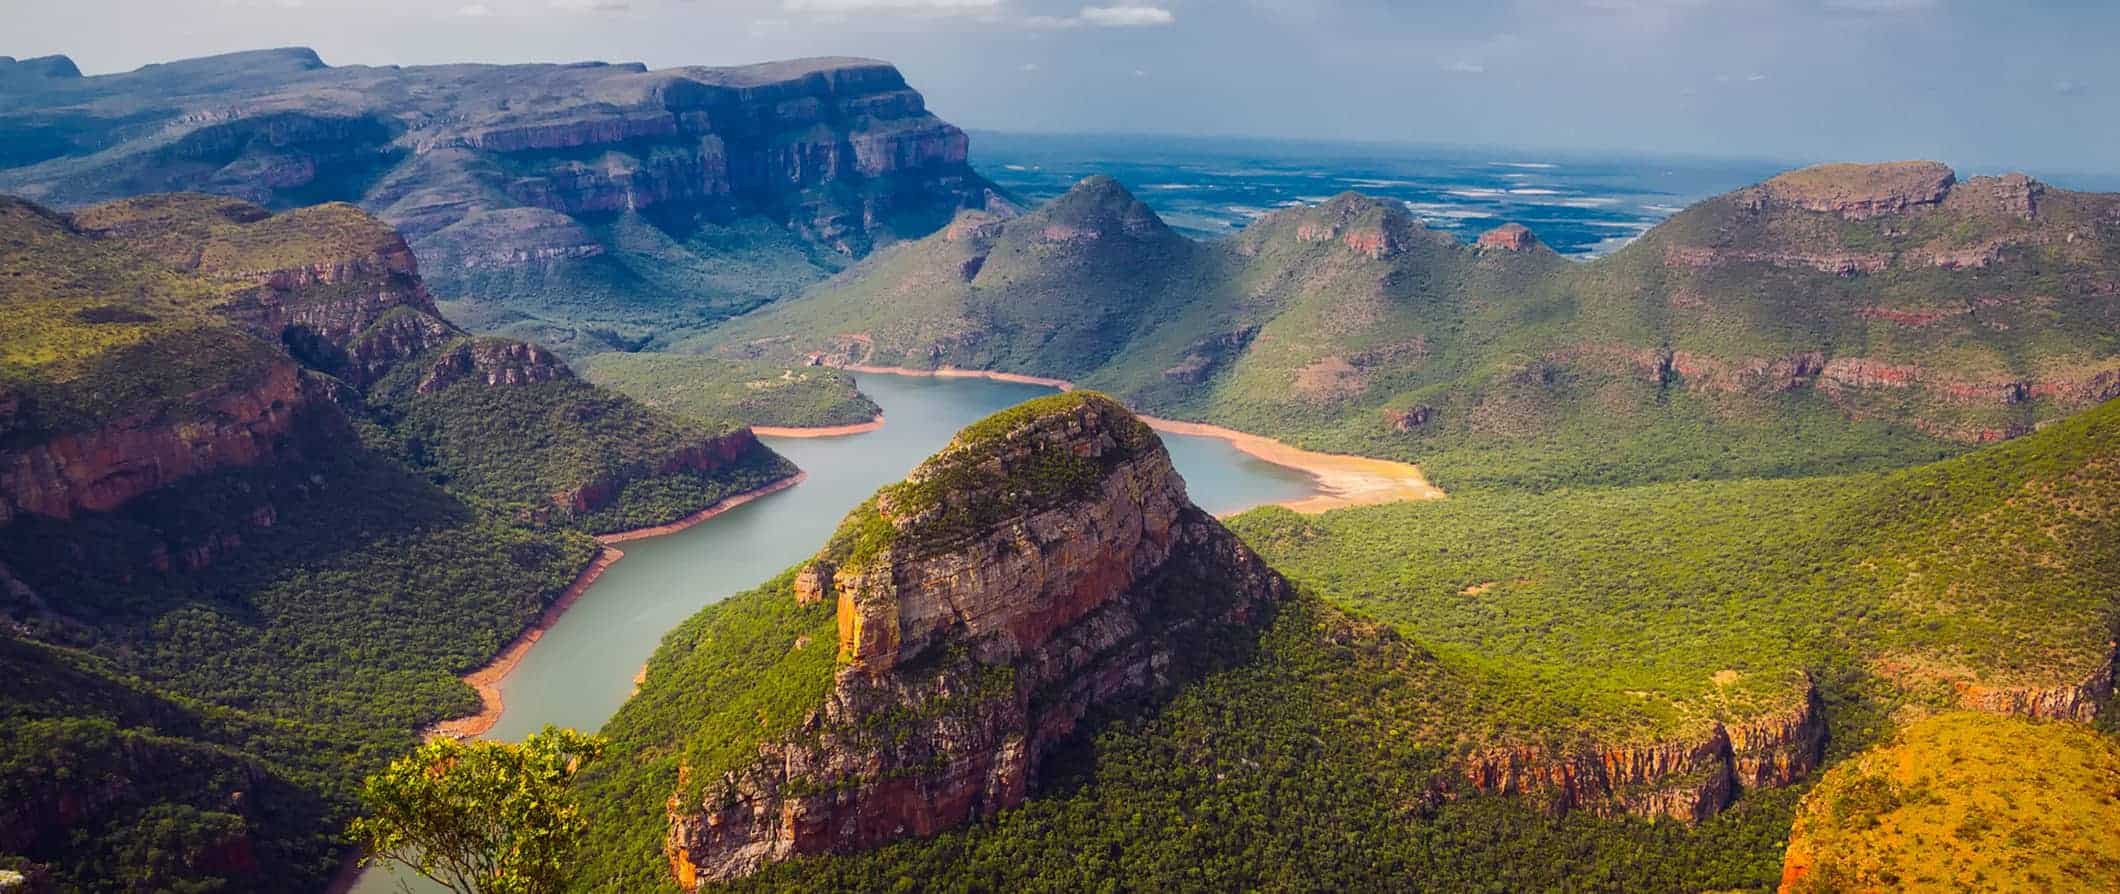 A beautiful aerial view of lush scenery in South Africa